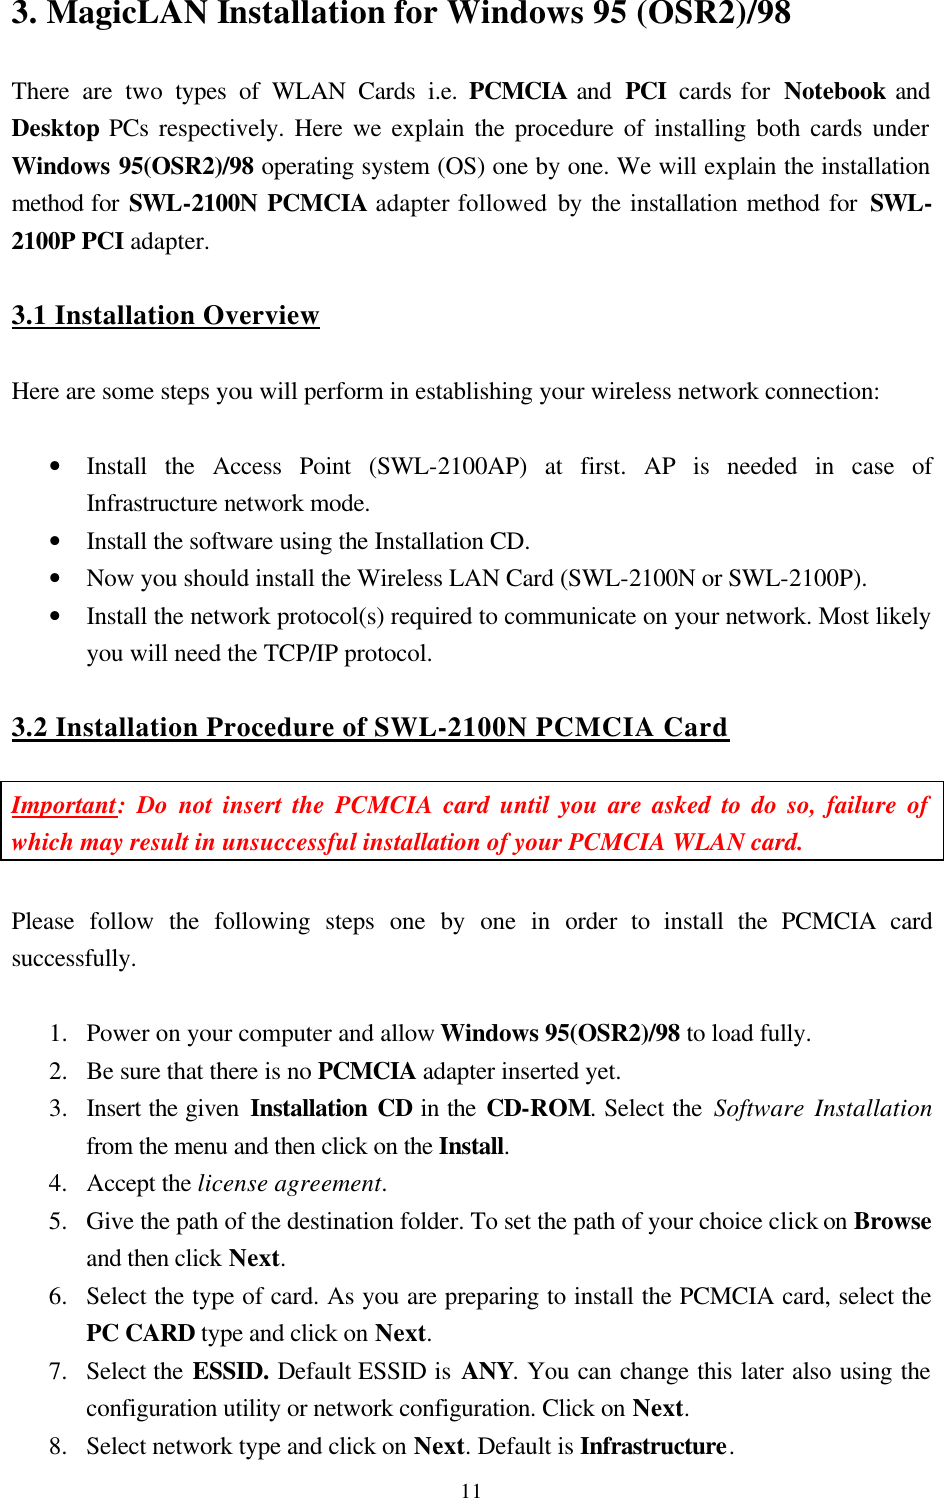  113. MagicLAN Installation for Windows 95 (OSR2)/98  There are two types of WLAN Cards i.e. PCMCIA and  PCI  cards for  Notebook and Desktop PCs respectively. Here we explain the procedure of installing both cards under Windows 95(OSR2)/98 operating system (OS) one by one. We will explain the installation method for SWL-2100N PCMCIA adapter followed by the installation method for SWL-2100P PCI adapter.  3.1 Installation Overview  Here are some steps you will perform in establishing your wireless network connection:  • Install the Access Point (SWL-2100AP) at first. AP is needed in case of Infrastructure network mode. • Install the software using the Installation CD. • Now you should install the Wireless LAN Card (SWL-2100N or SWL-2100P).  • Install the network protocol(s) required to communicate on your network. Most likely you will need the TCP/IP protocol.  3.2 Installation Procedure of SWL-2100N PCMCIA Card  Important: Do not insert the PCMCIA card until you are asked to do so, failure of which may result in unsuccessful installation of your PCMCIA WLAN card.  Please follow the following steps one by one in order to install the PCMCIA card successfully.  1.  Power on your computer and allow Windows 95(OSR2)/98 to load fully. 2.  Be sure that there is no PCMCIA adapter inserted yet. 3.  Insert the given Installation CD in the CD-ROM. Select the Software Installation from the menu and then click on the Install.  4.  Accept the license agreement. 5.  Give the path of the destination folder. To set the path of your choice click on Browse and then click Next. 6.  Select the type of card. As you are preparing to install the PCMCIA card, select the PC CARD type and click on Next. 7.  Select the ESSID. Default ESSID is ANY. You can change this later also using the configuration utility or network configuration. Click on Next. 8.  Select network type and click on Next. Default is Infrastructure. 